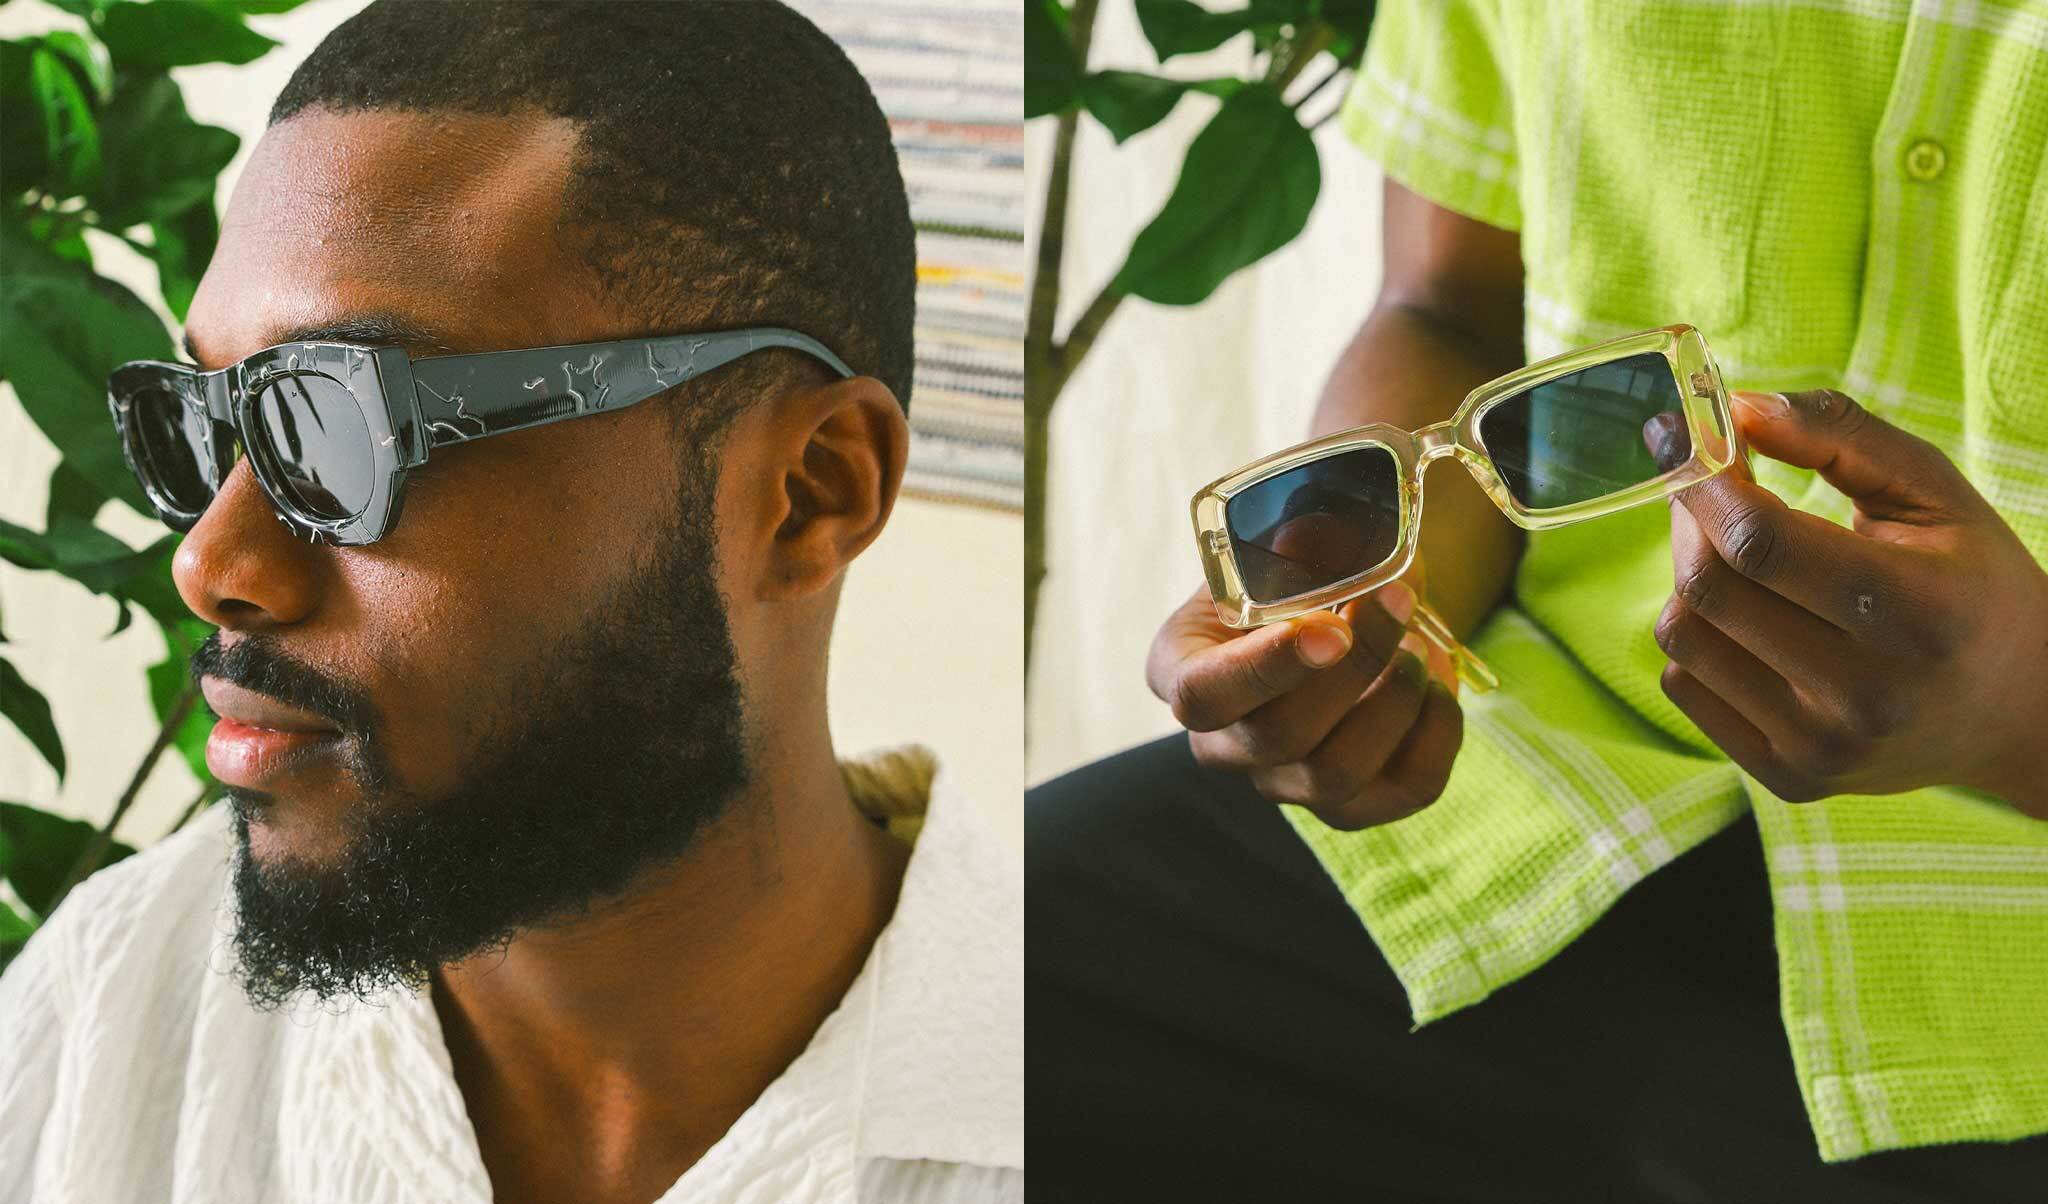 Giveaway: Win a pair of Komono sunglasses + a matching cord